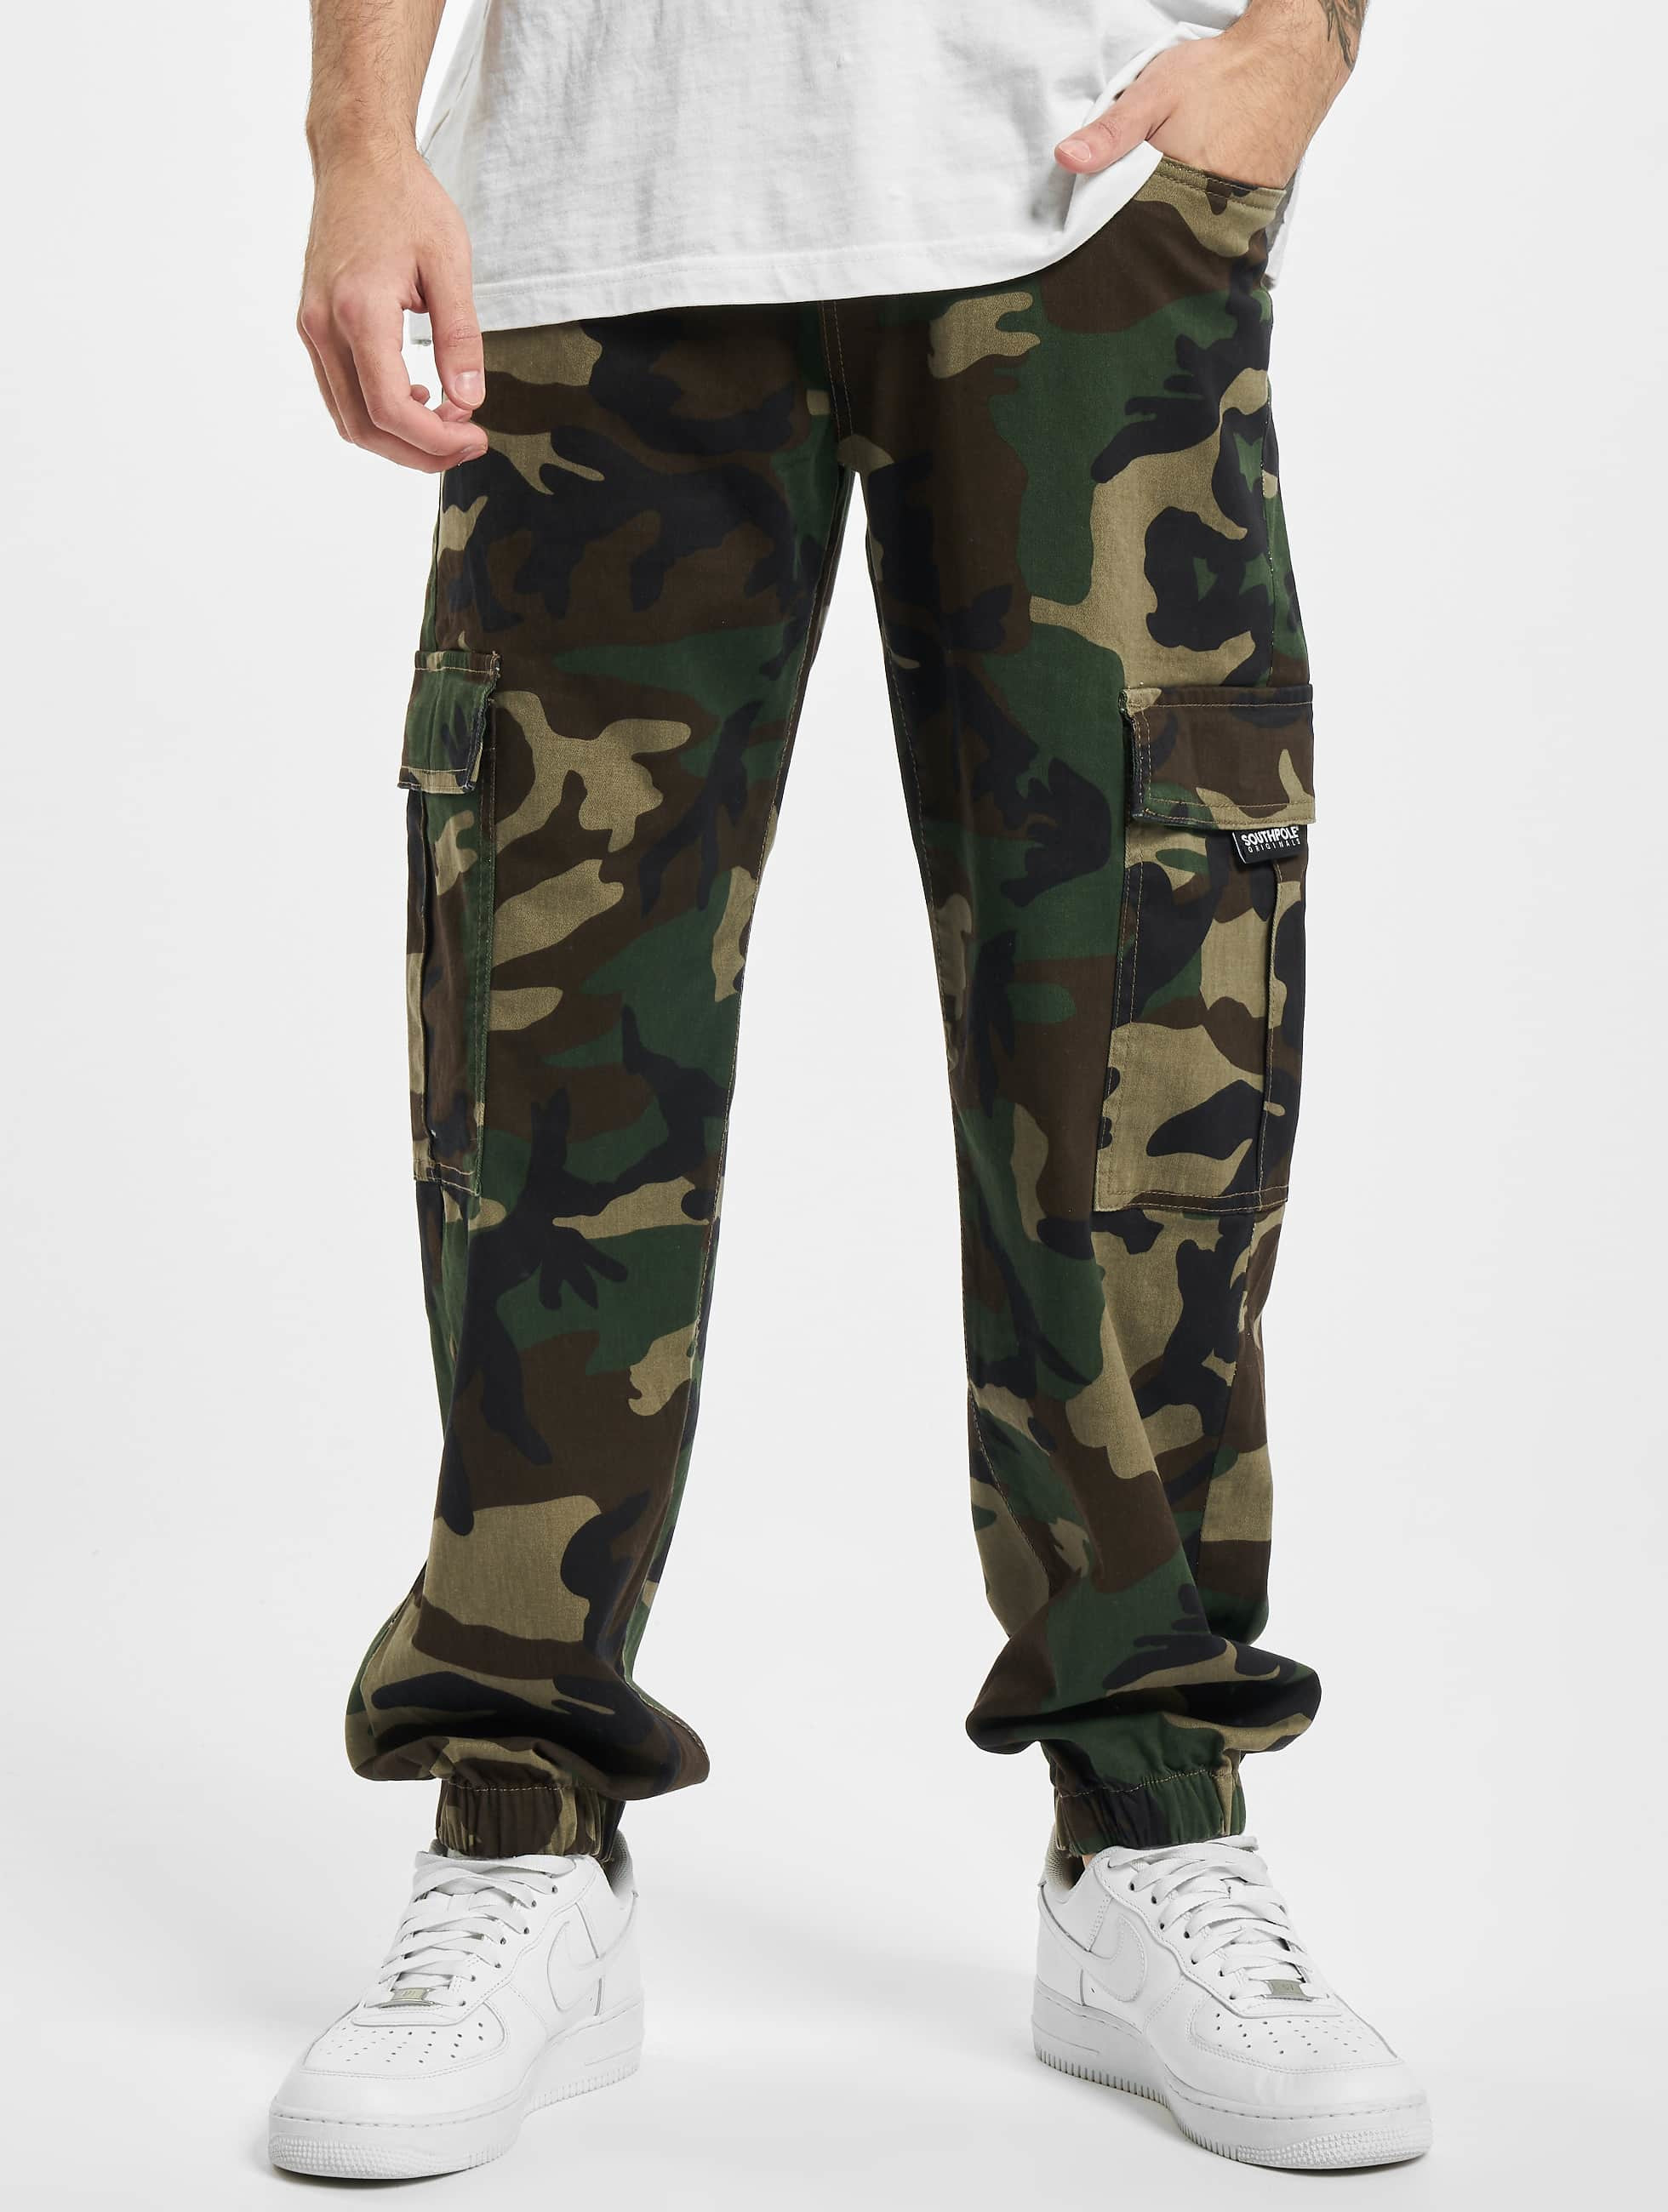 Southpole Pant / Cargo Camo in camouflage 801107